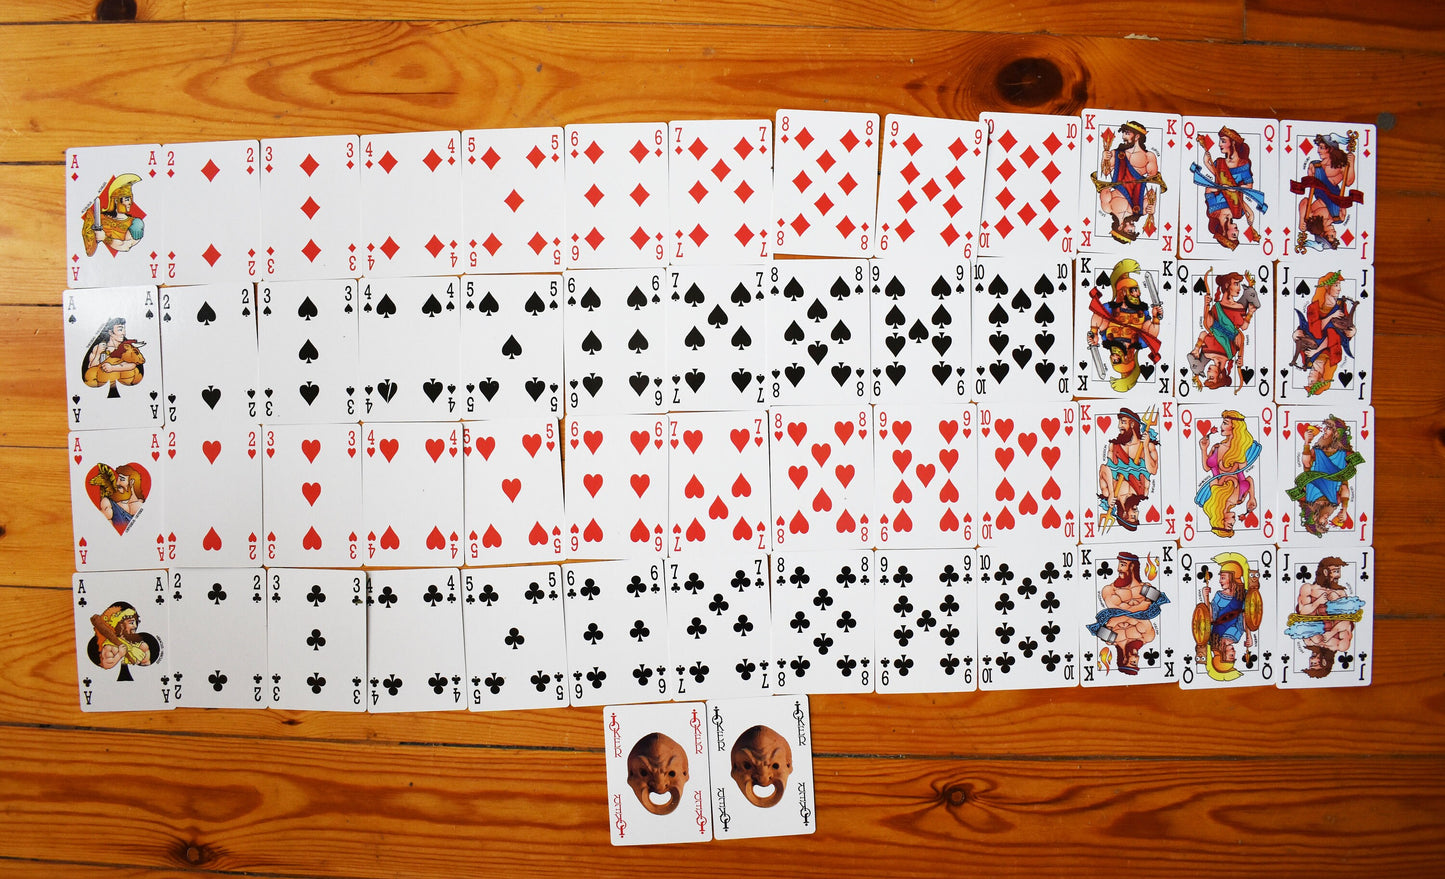 2 Decks of Ancient Greek Mythology inspired by Sculpture and Pottery - Canasta, Bridge, Poker, Black Jack - Playing Cards